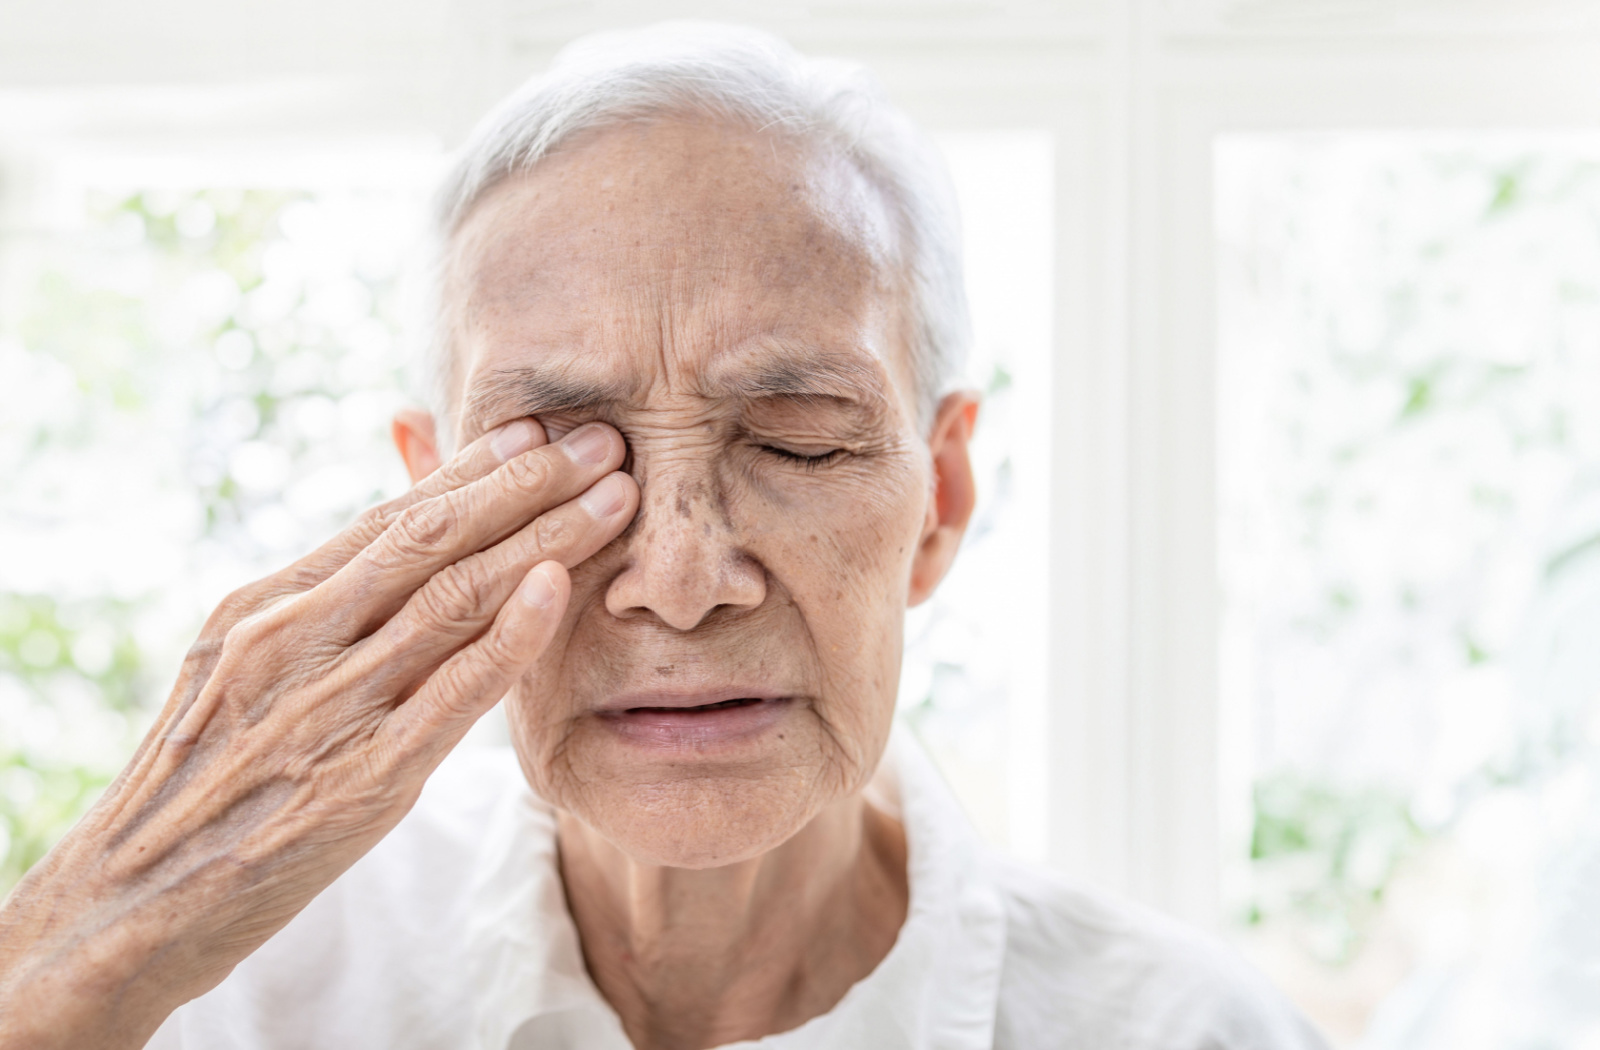 An older adult man with his eyes closed rubbing his right eye with his right hand